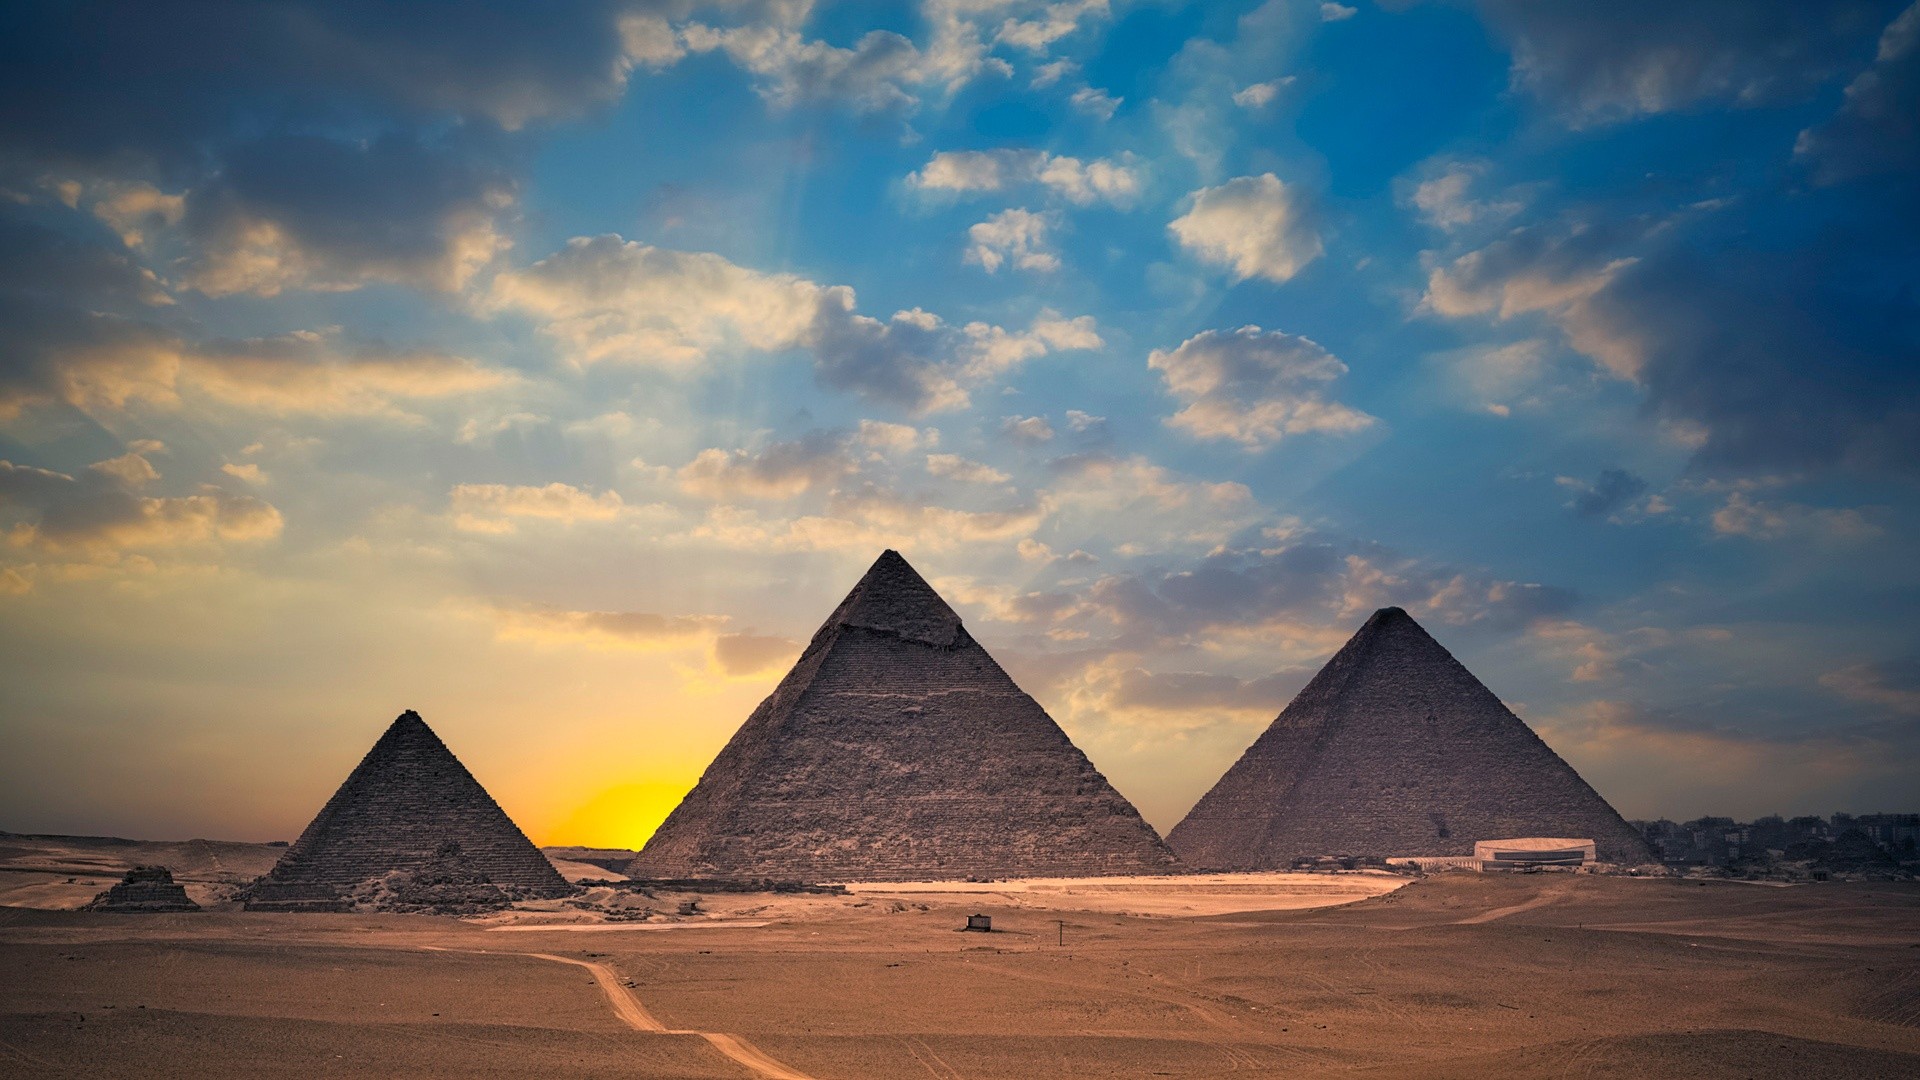 General 1920x1080 Egypt pyramid filter Pyramids of Giza nature architecture desert sunset landscape clouds history ancient